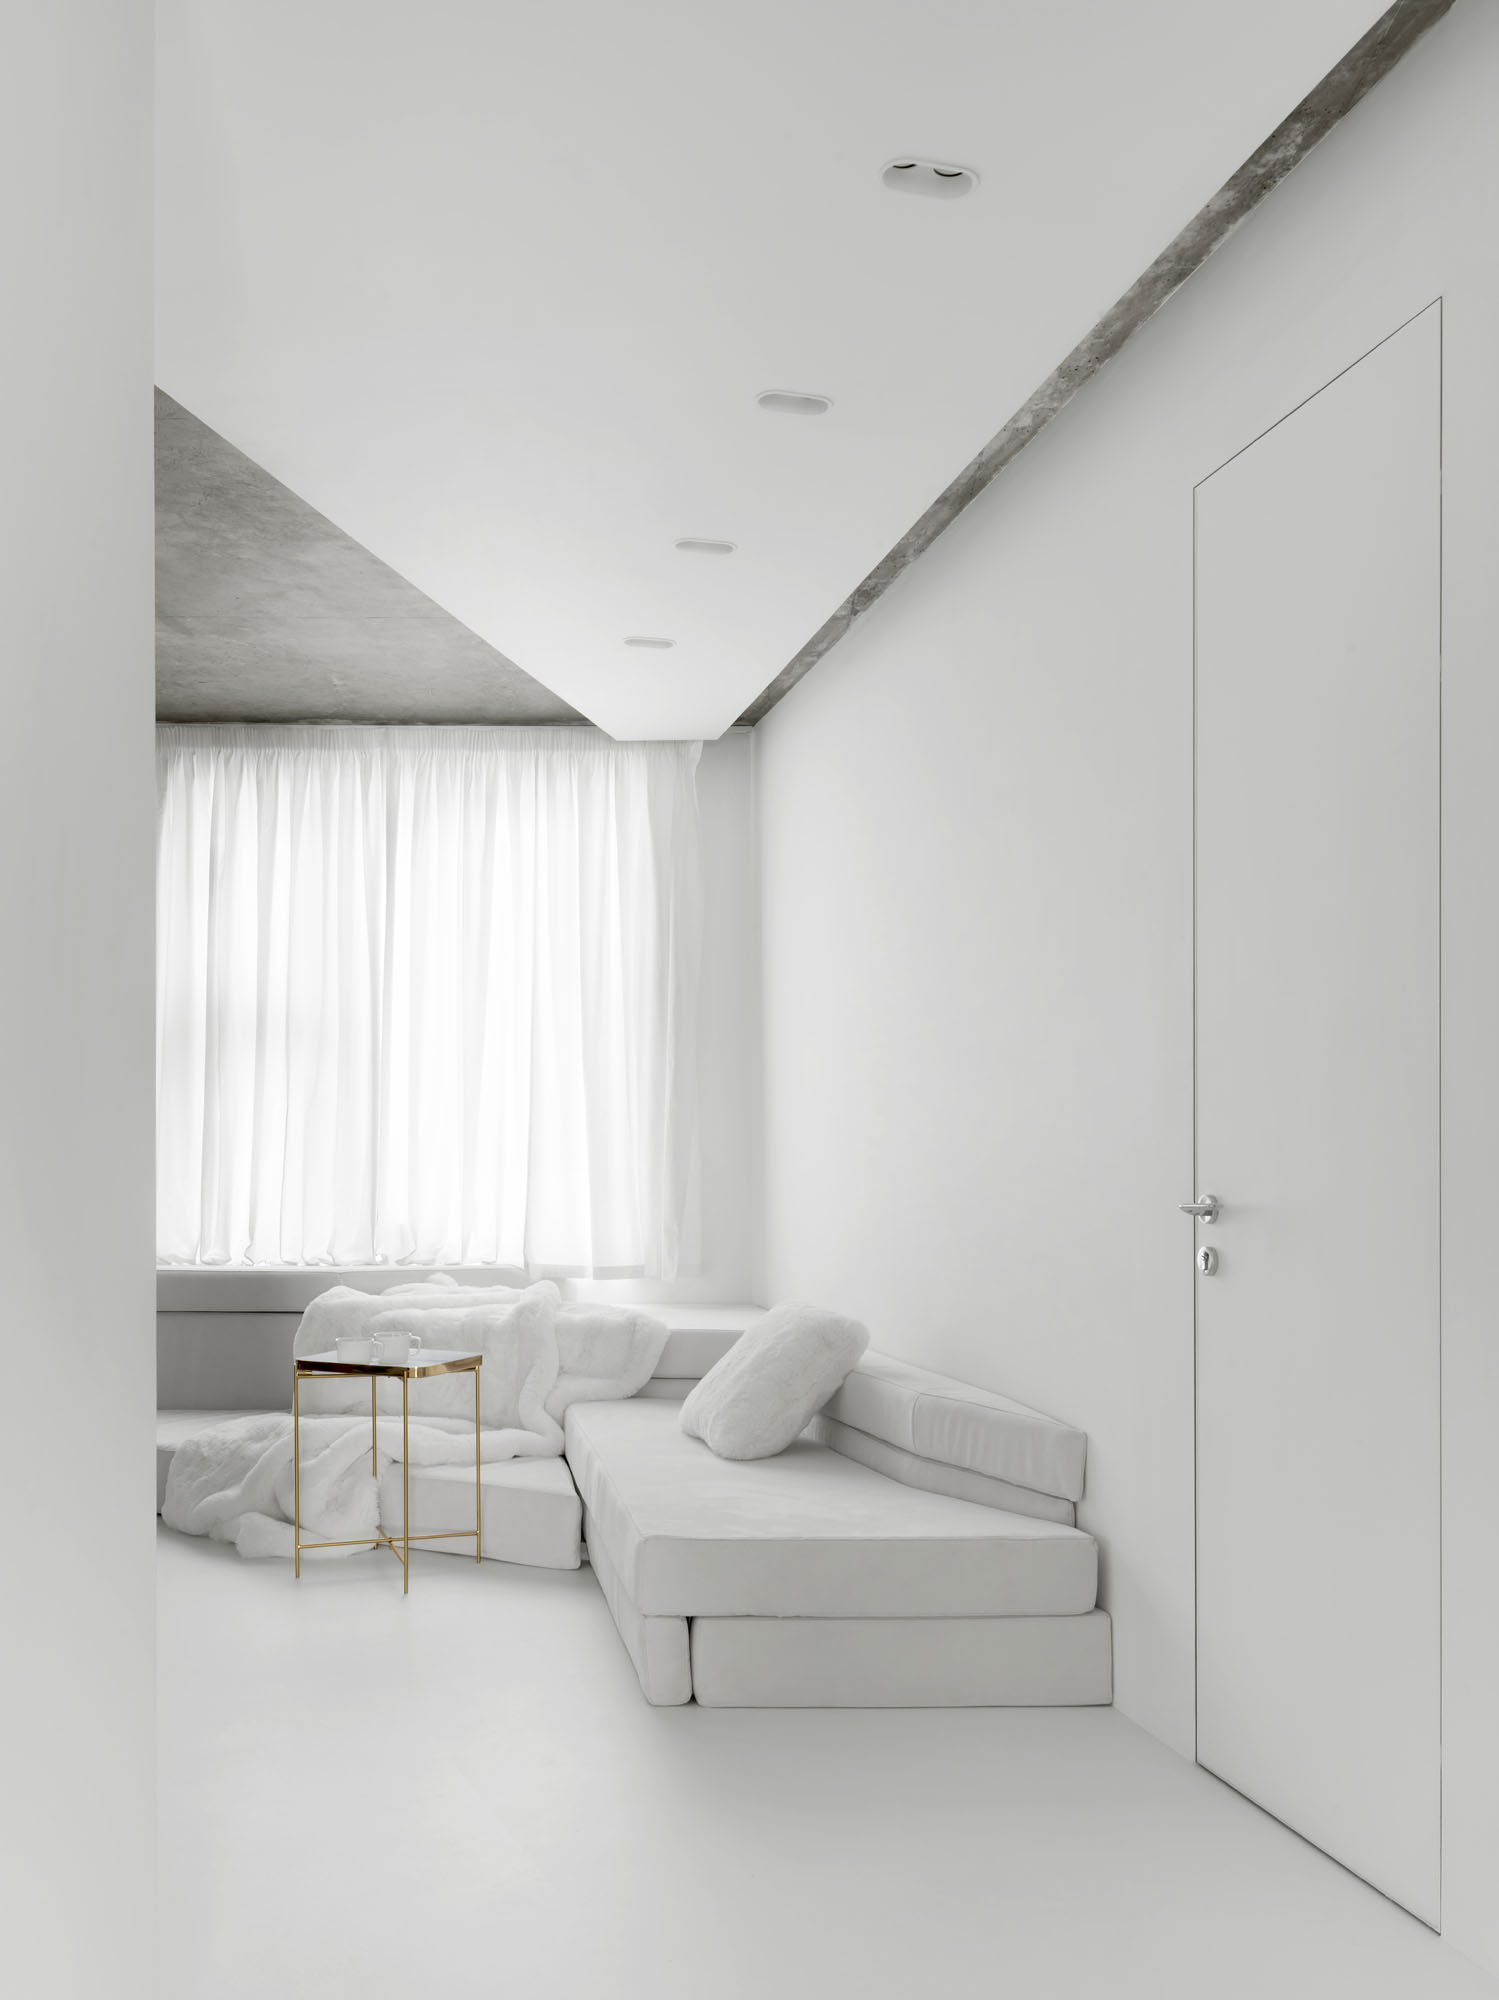 interior of an apartment with white walls and furniture